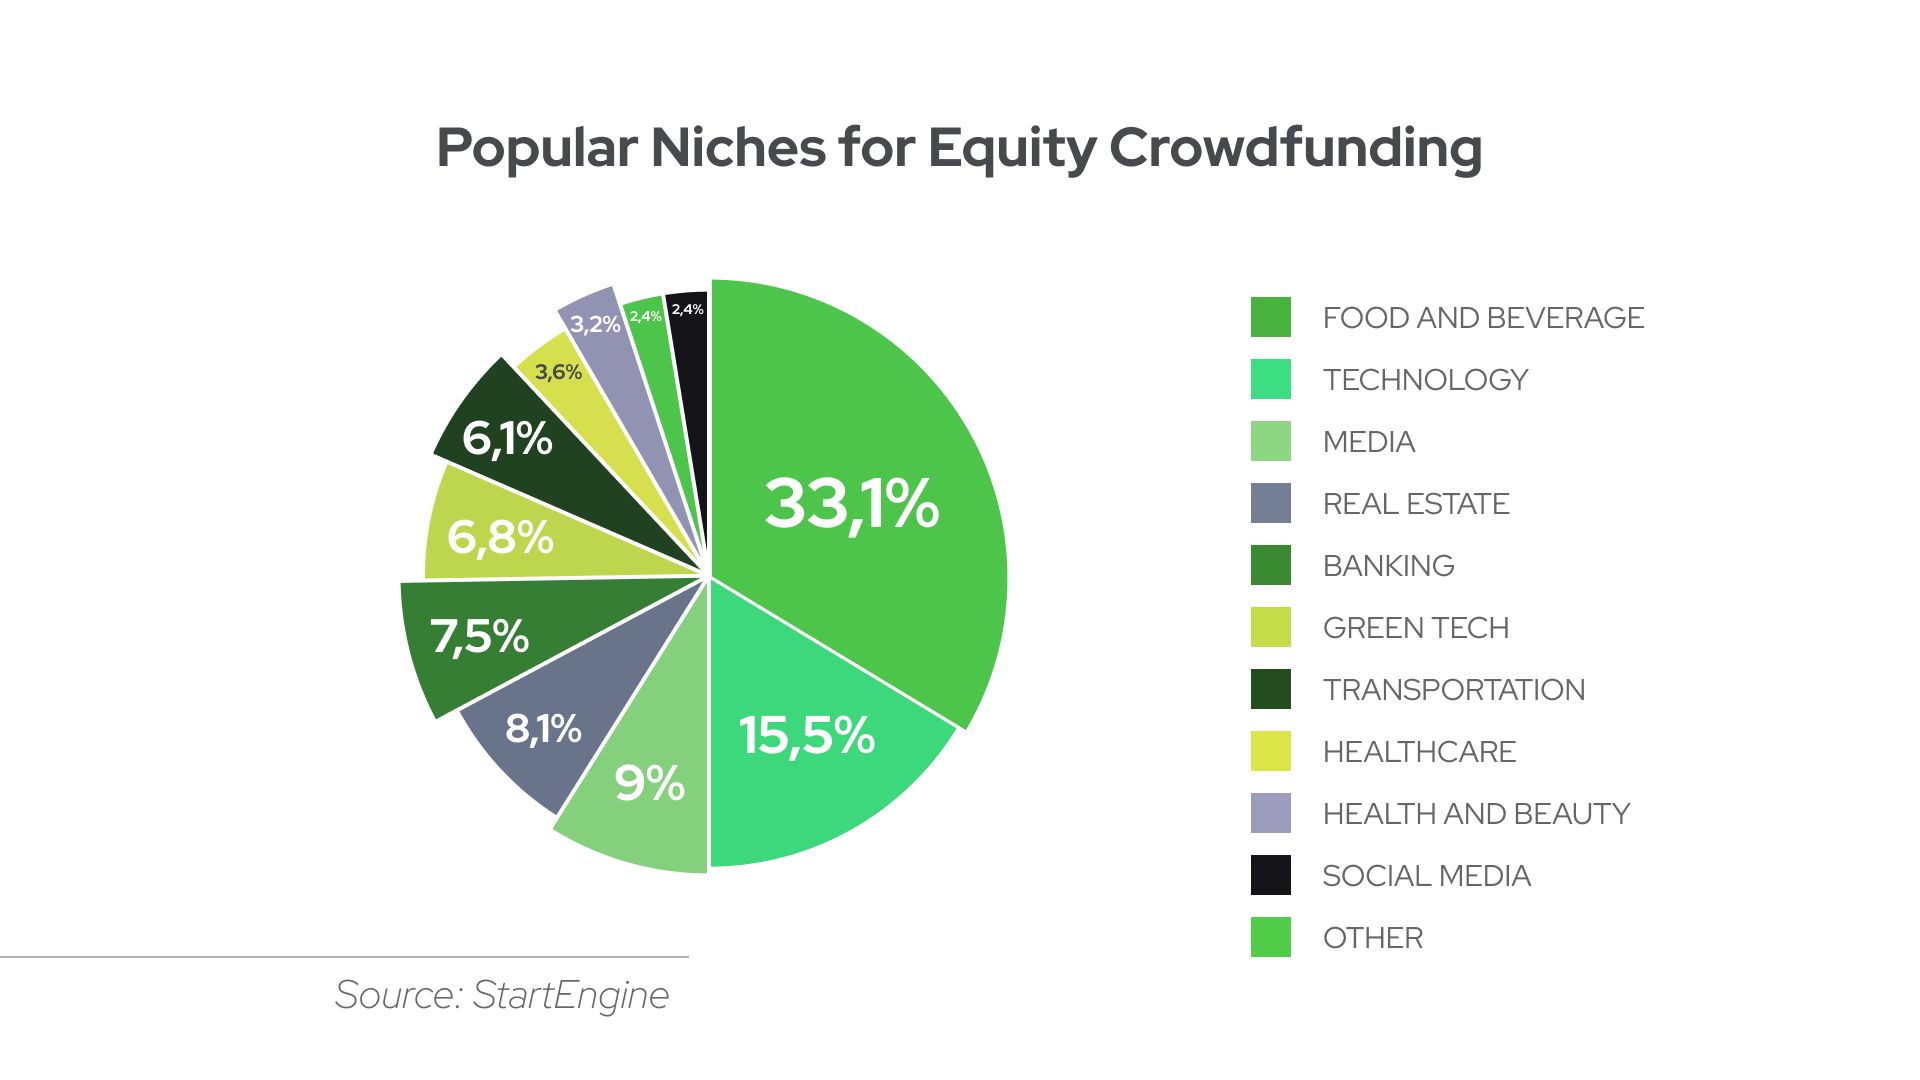 Food and beverage, technology, and media hold leading positions in equity funding.